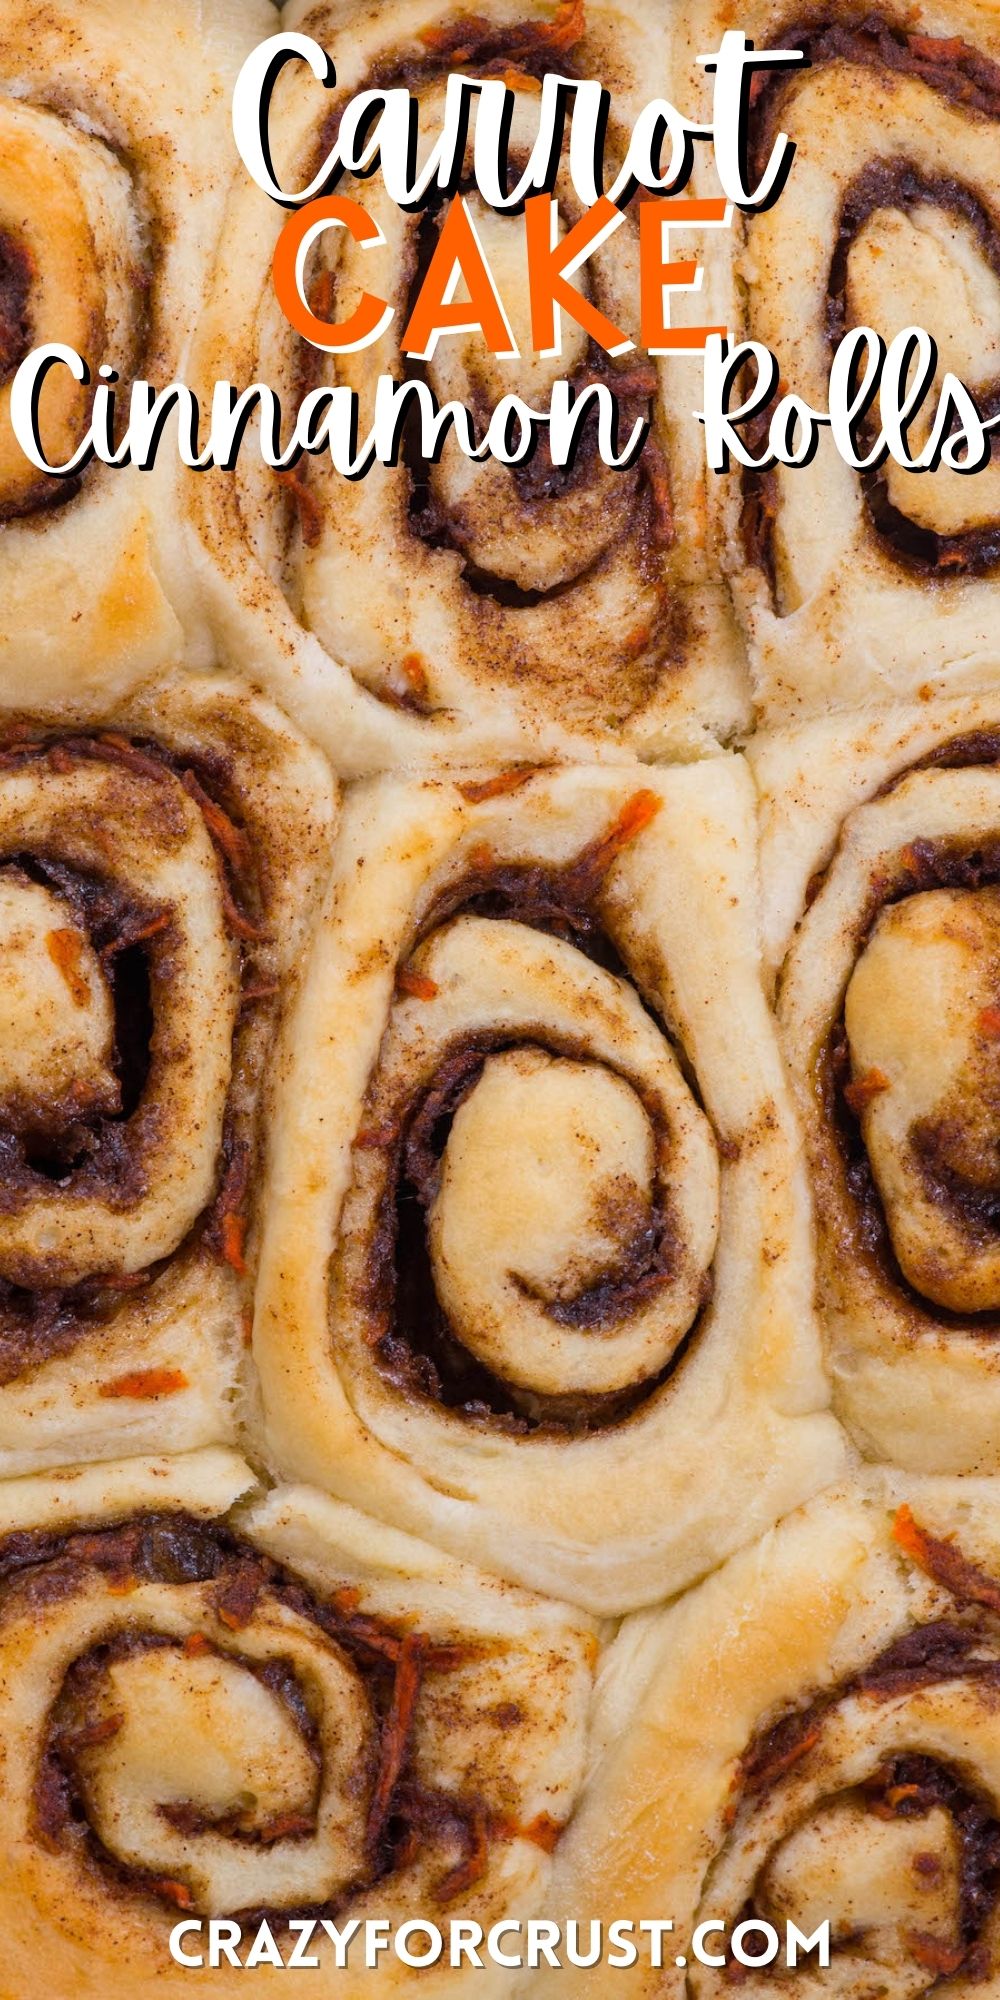 cinnamon rolls with carrots baked in with words on the image.